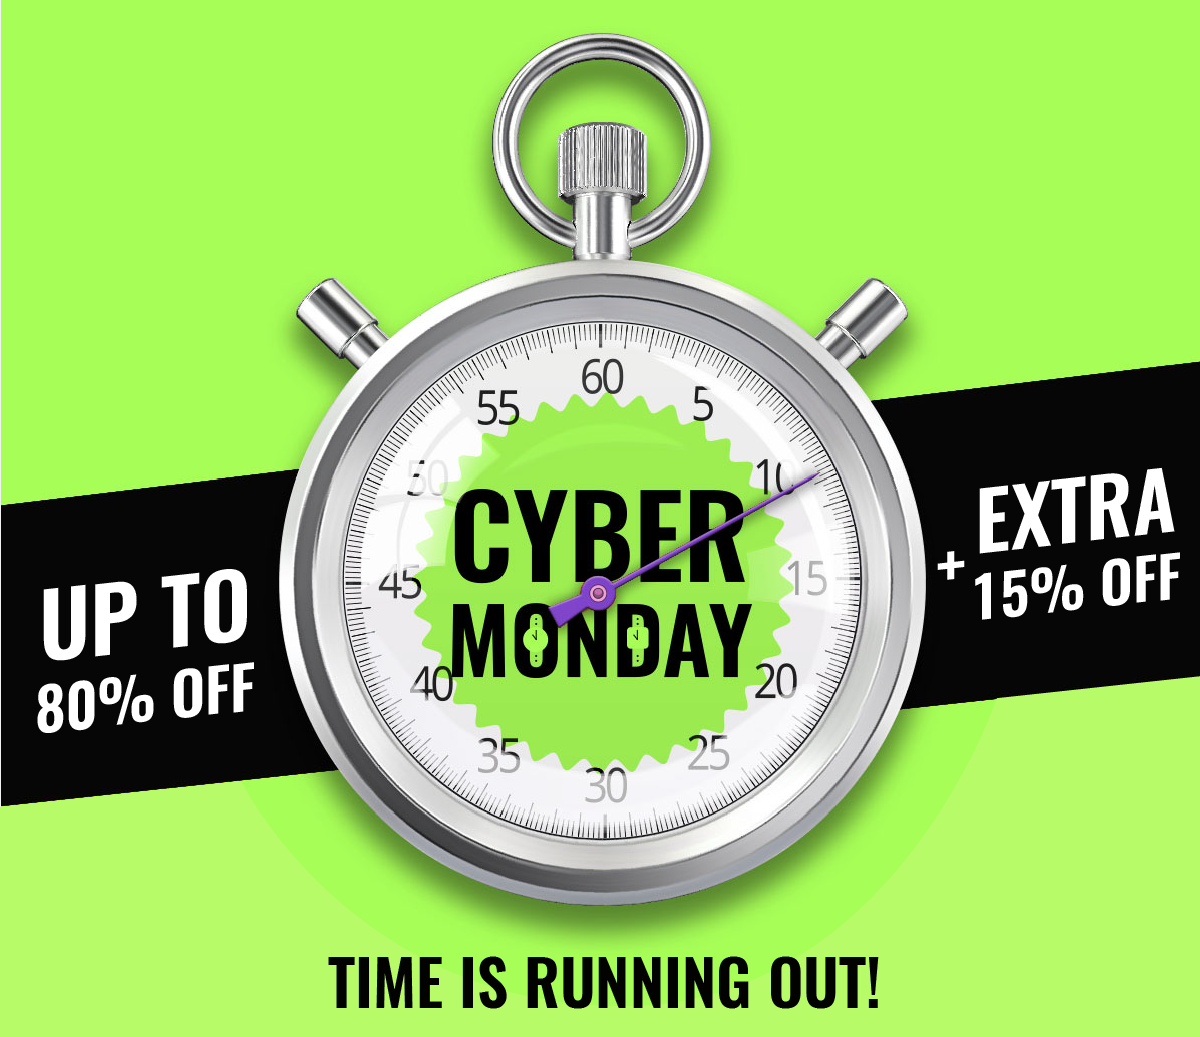 Last 12 hours of Cyber Monday pricing!